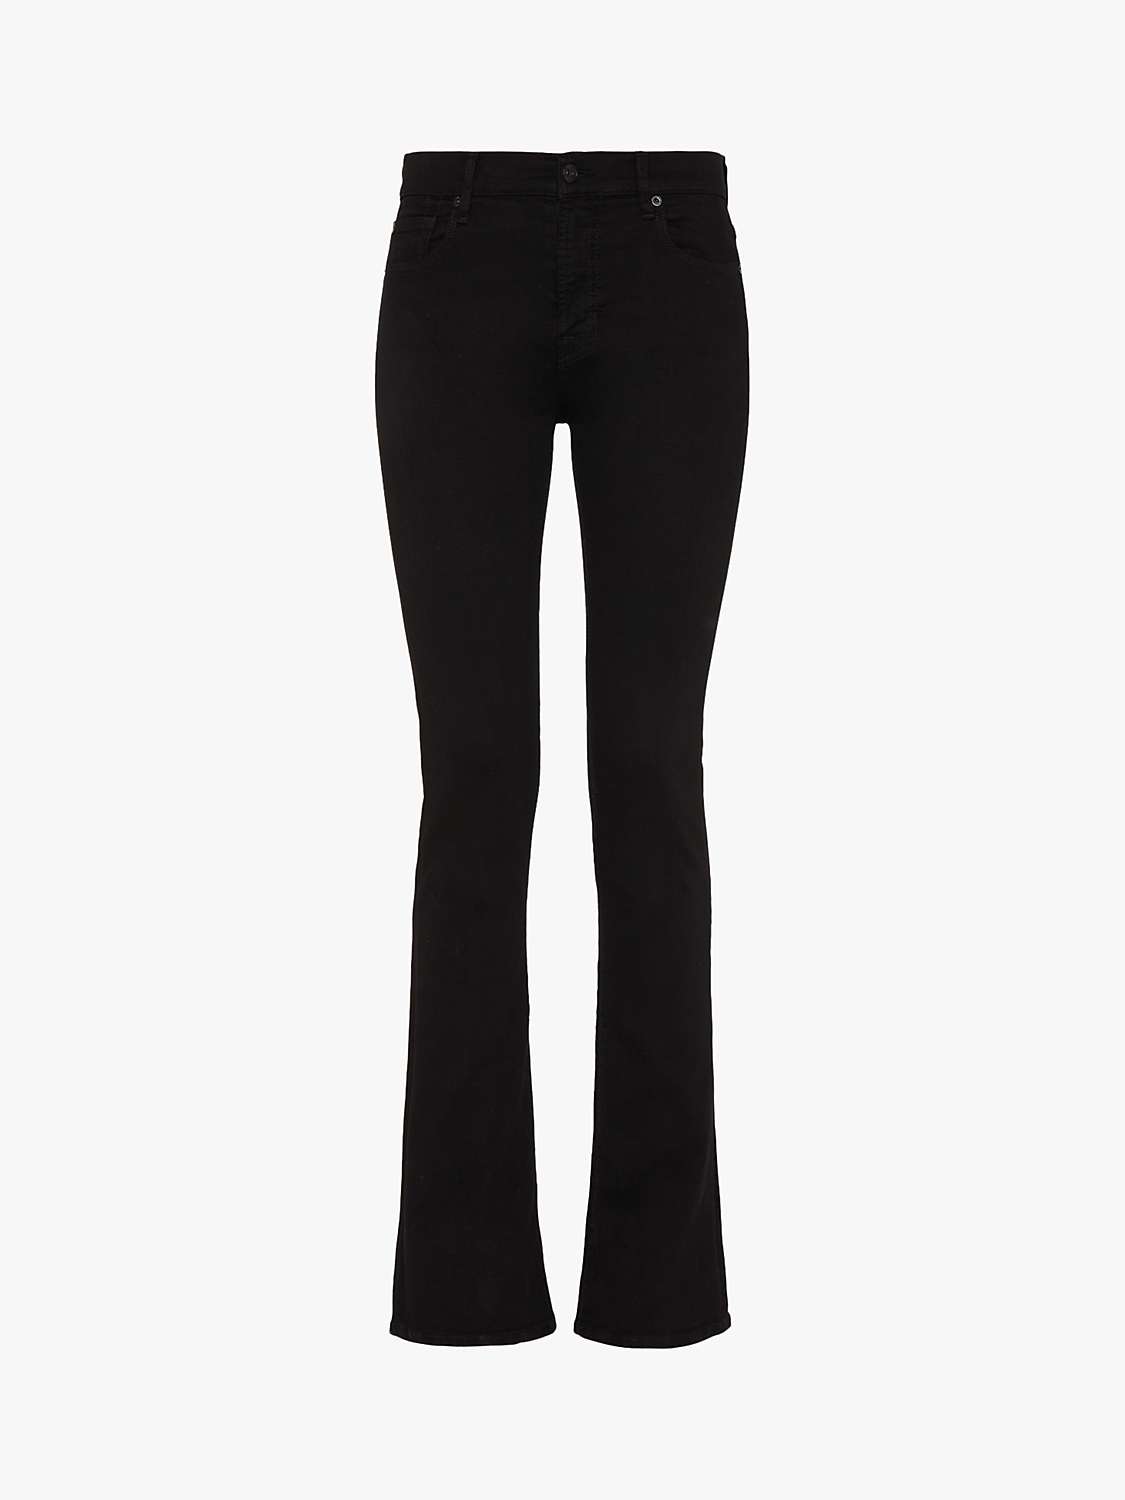 Buy 7 For All Mankind B(Air) Bootcut Jeans, Rinsed Black Online at johnlewis.com